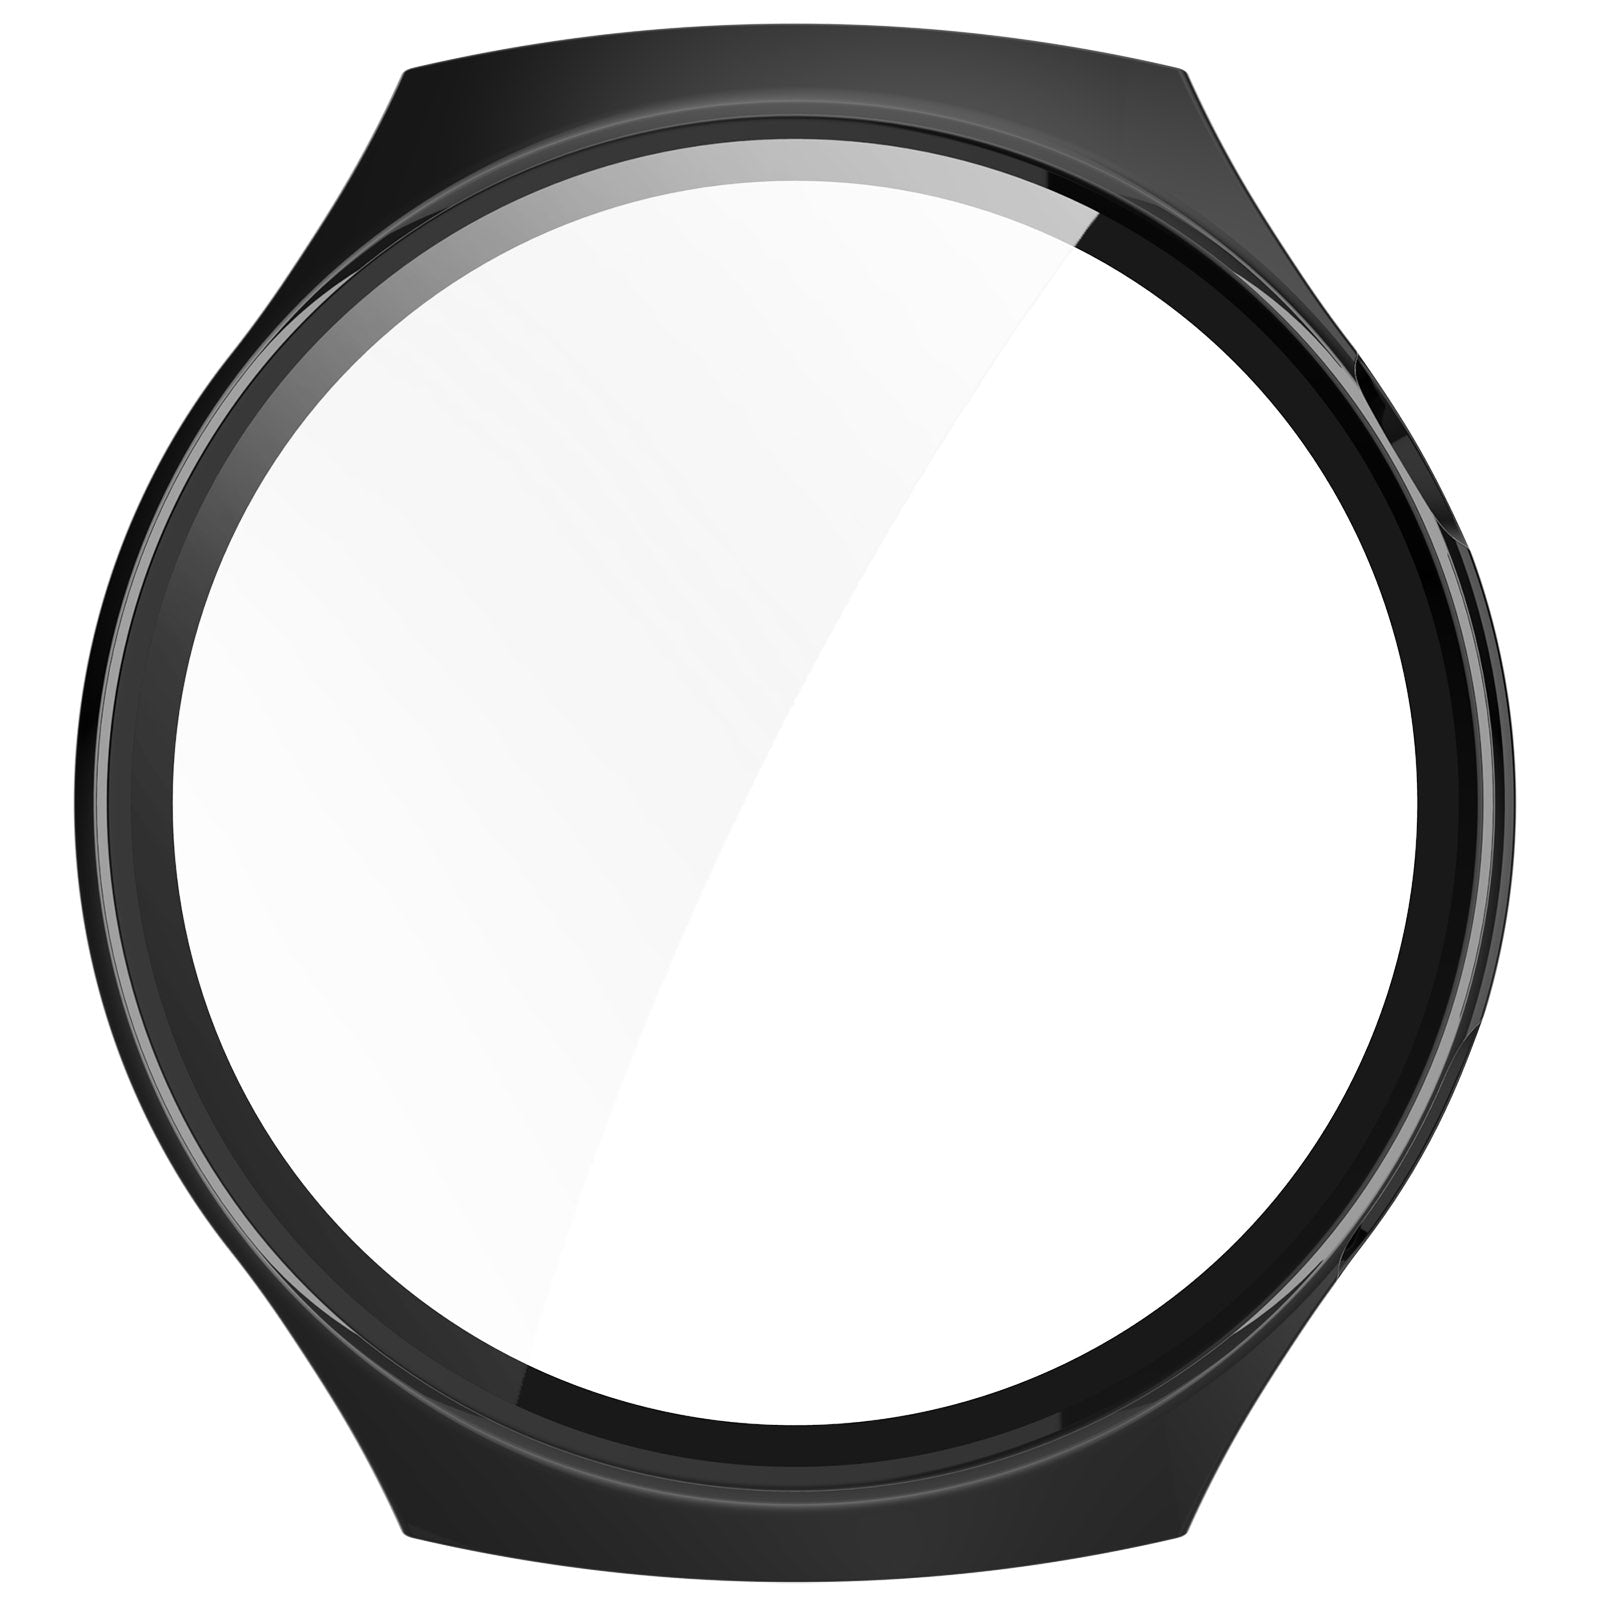 For Huawei Watch 4 Pro Case PC Cover with Curved Tempered Glass Screen Protector - Black